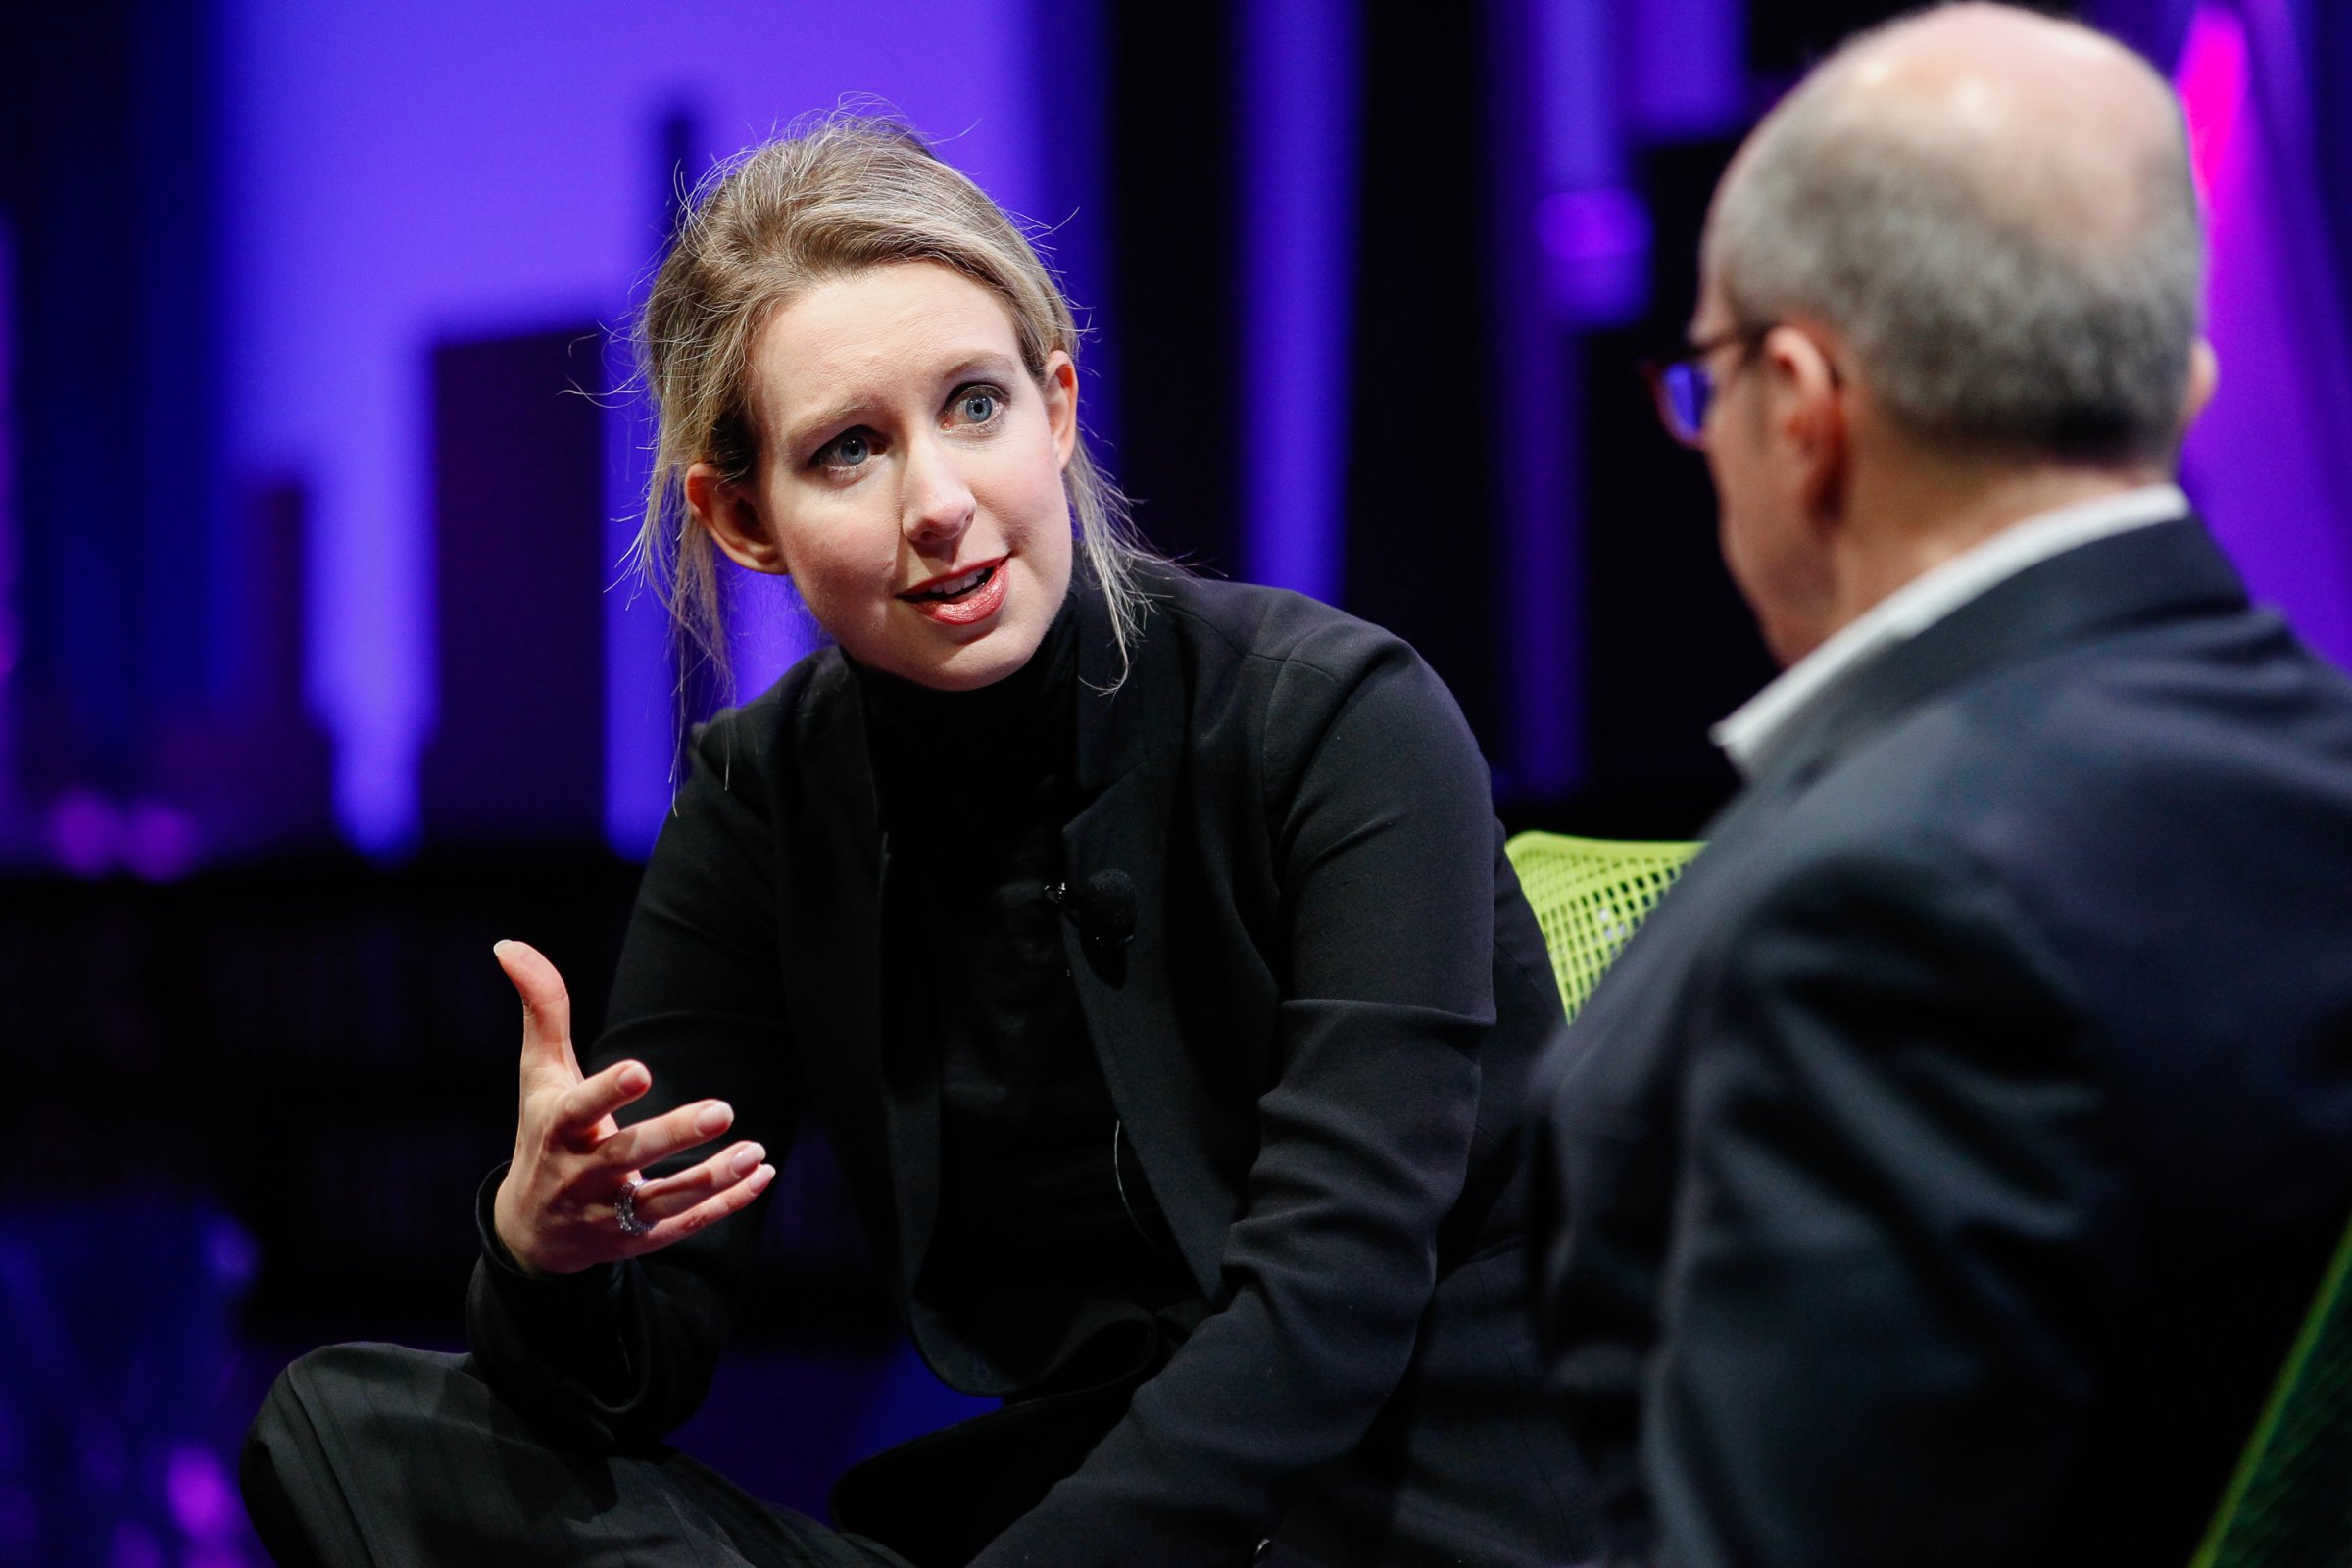 Elizabeth Holmes (L) and Alan Murray speak at the Fortune Global Forum at the Fairmont Hotel on November 2, 2015 in San Francisco, California.